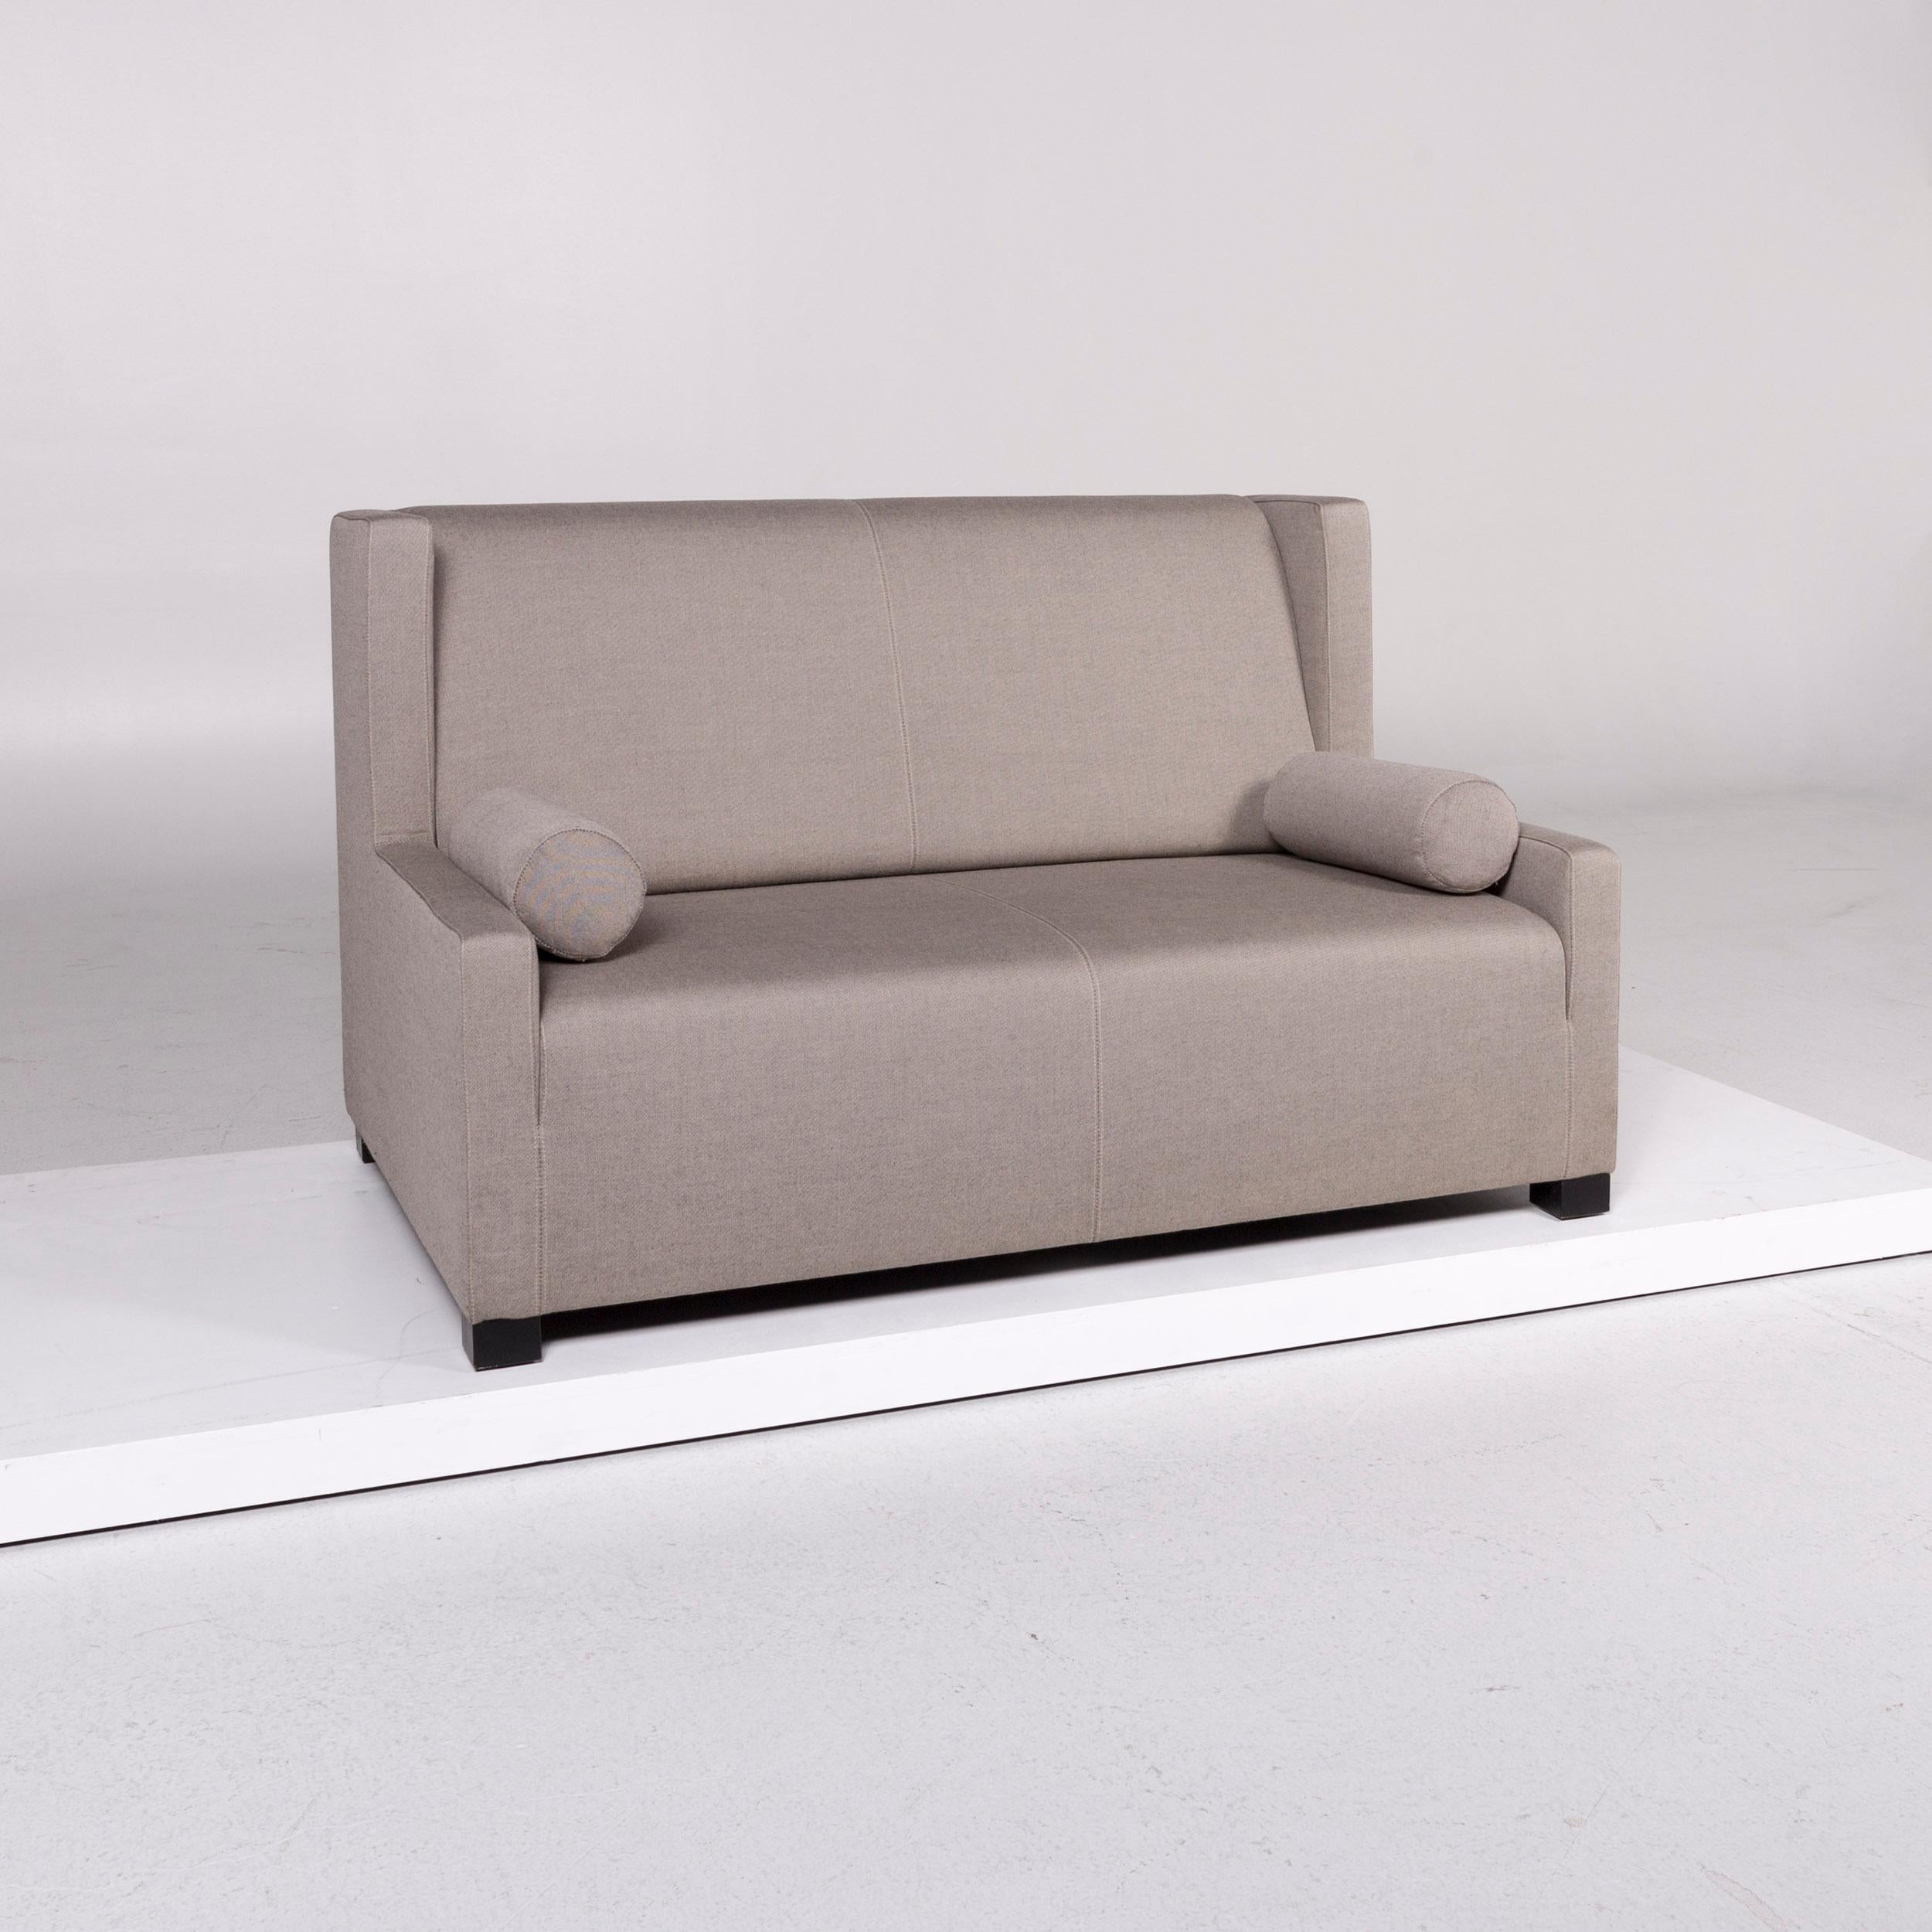 We bring to you a Wittmann Museo fabric sofa gray two-seat couch.
 

Product measurements in centimetres:
 

Depth 91
Width 141
Height 86
Seat-height 39
Rest-height 46
Seat-depth 58
Seat-width 123
Back-height 48.
   